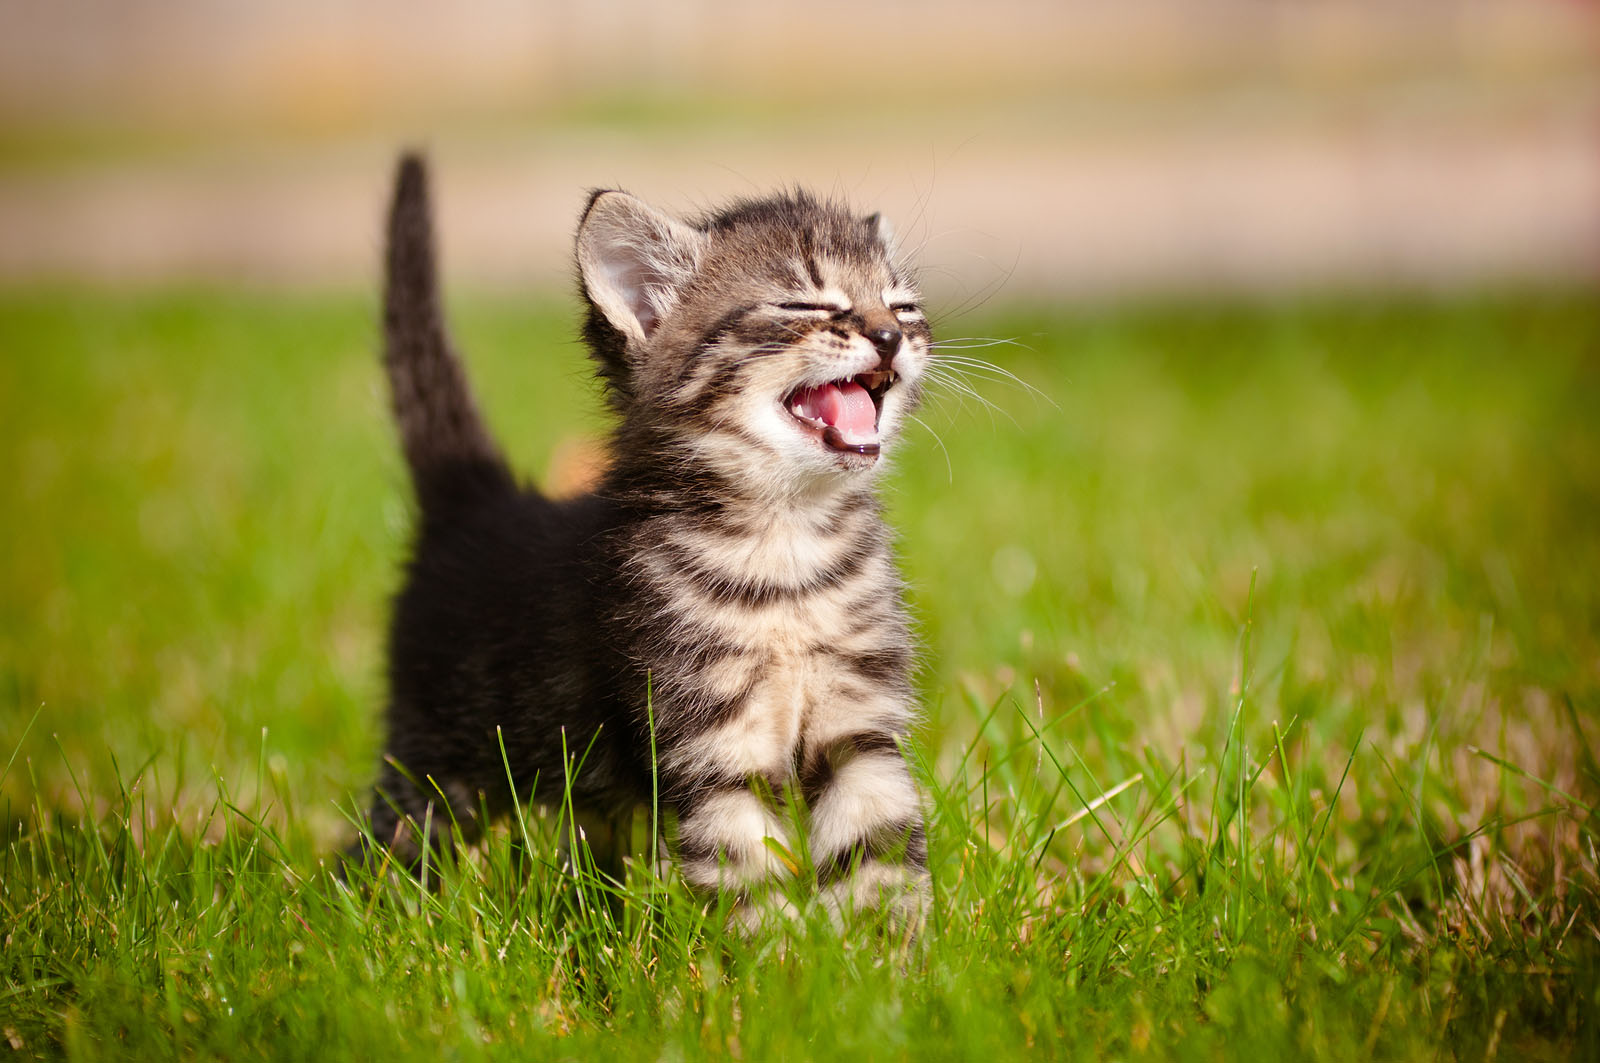 this is a photo of a cute kitten